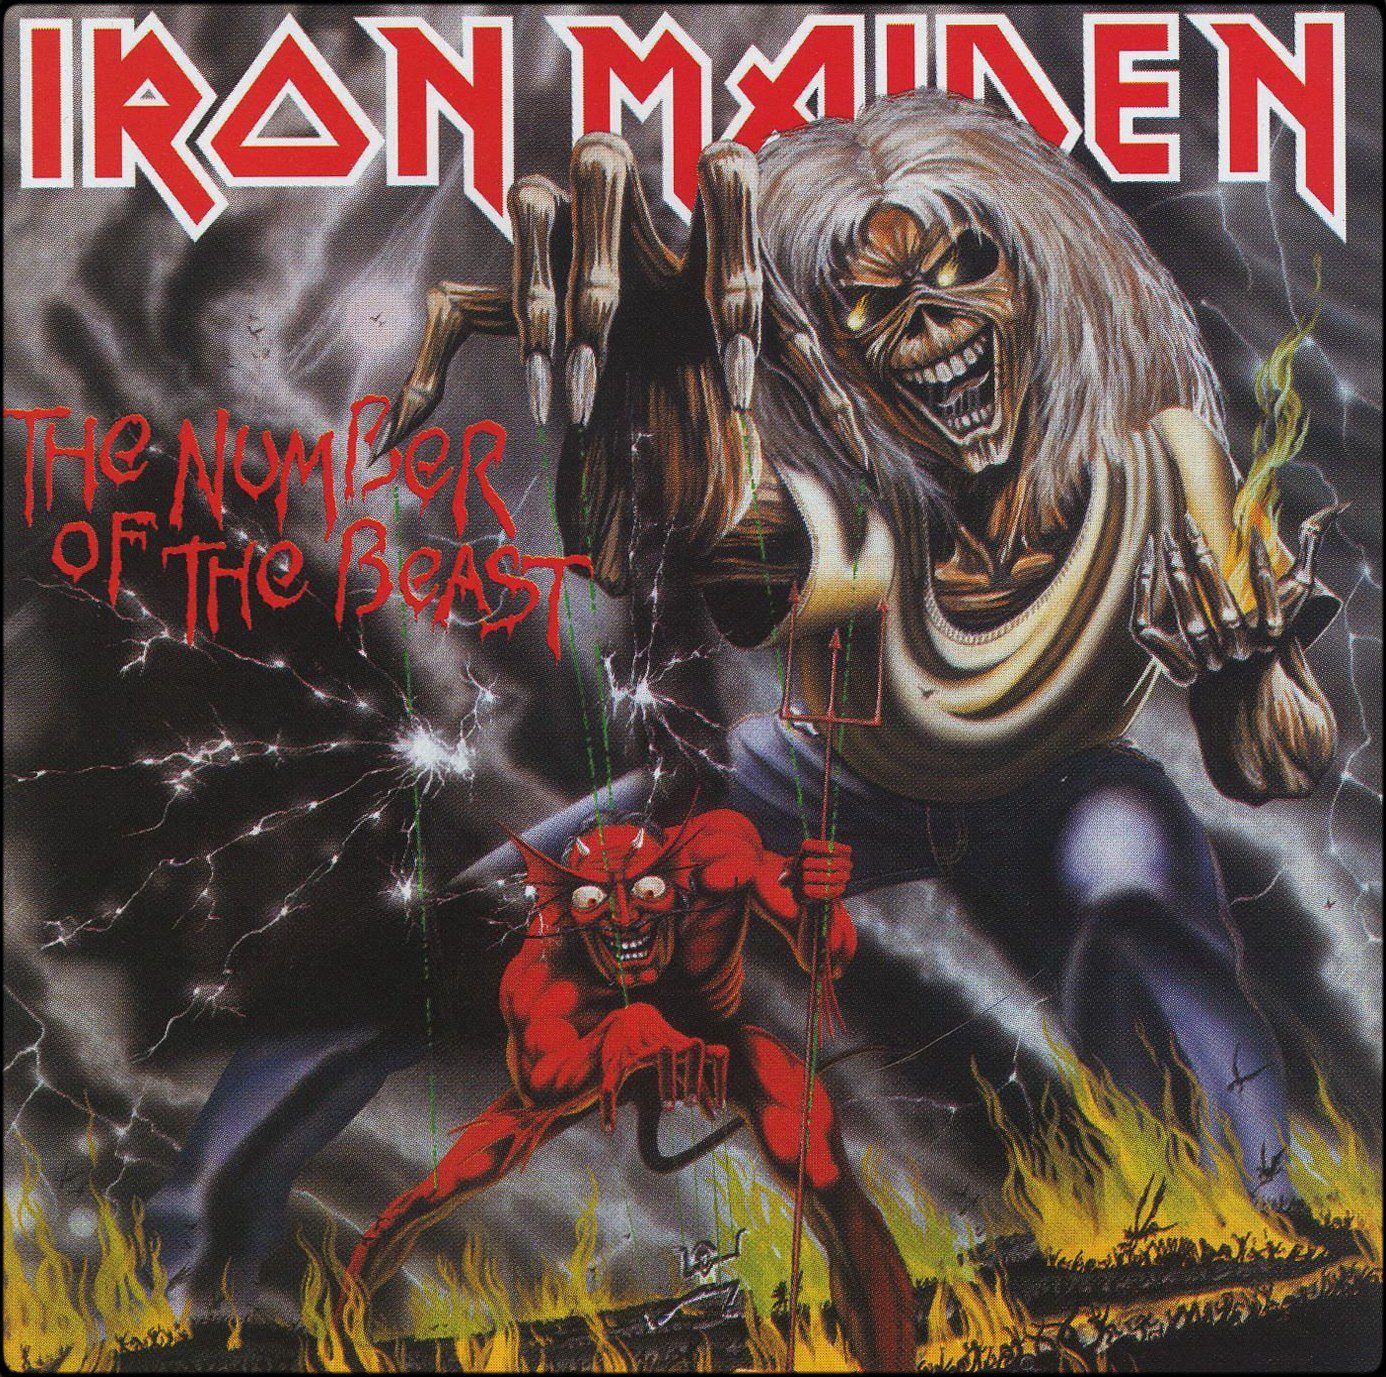 iron-maiden-the-number-of-the-beast.jpg